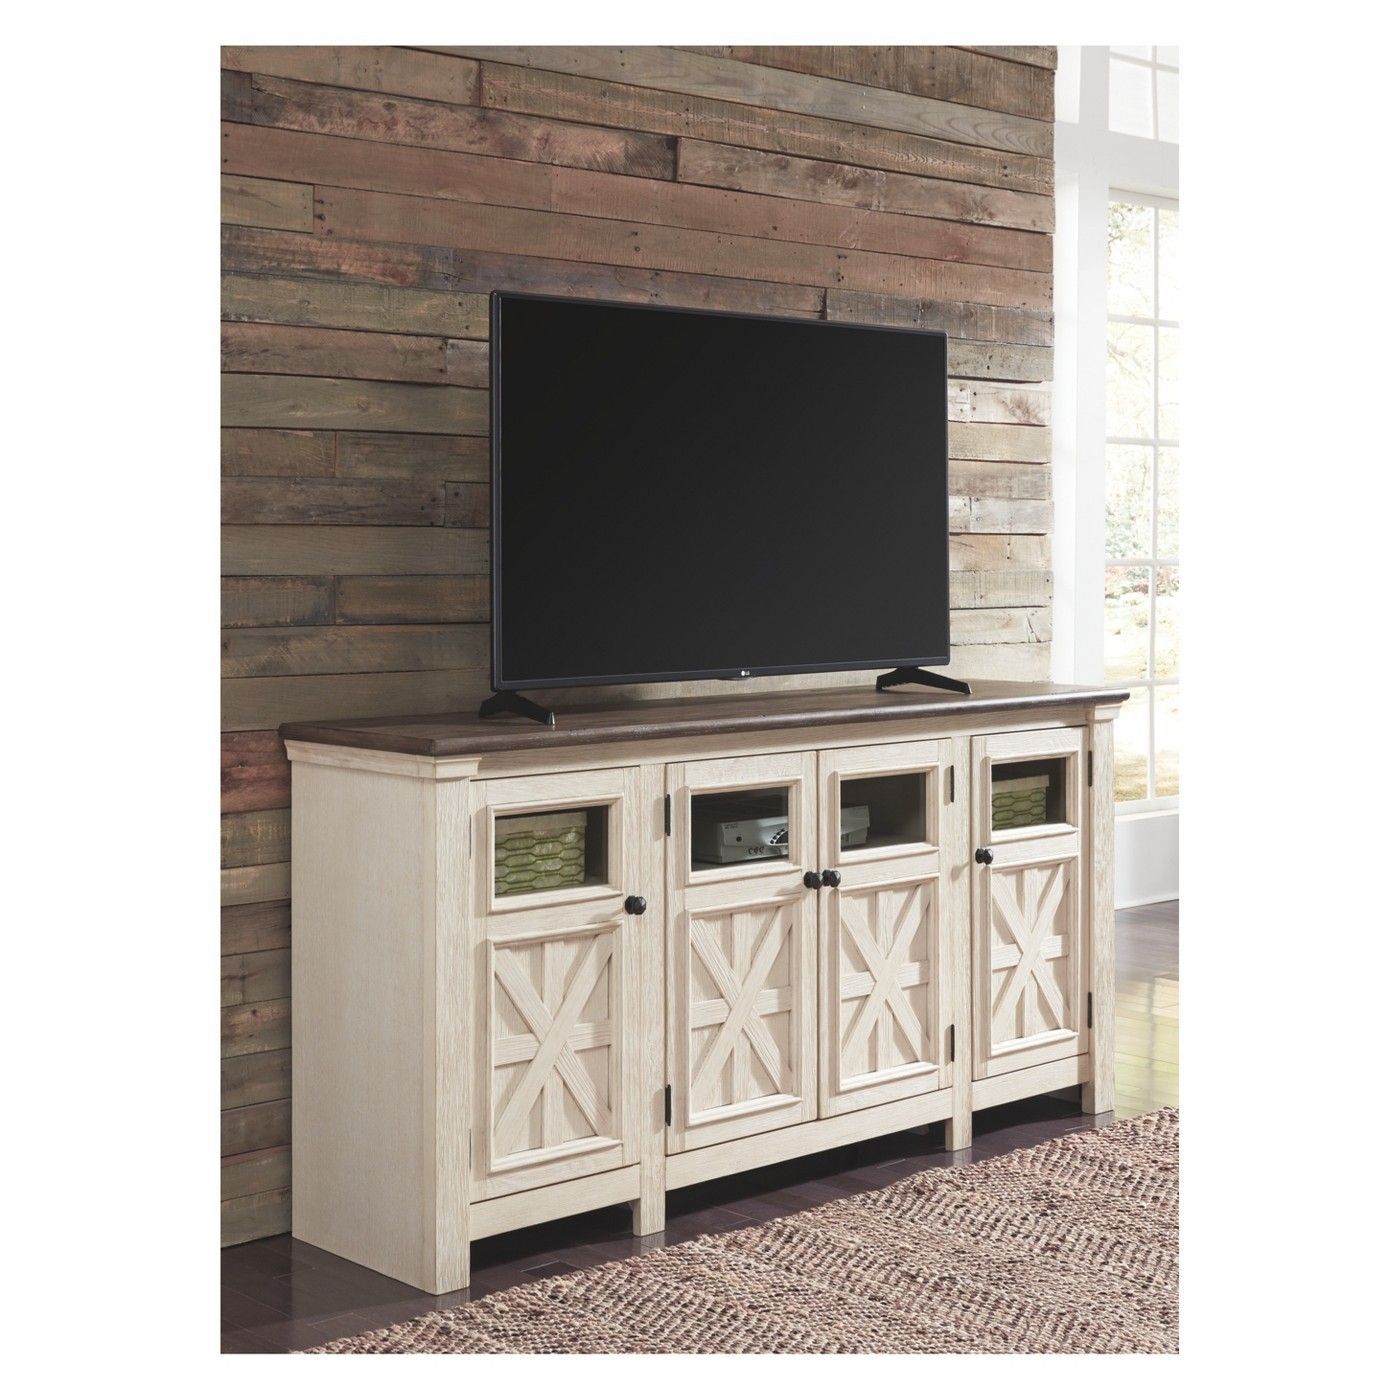 Bolanburg Extra Large Tv Stand Brown/white – Signature Regarding Chromium Extra Wide Tv Unit Stands (View 2 of 15)